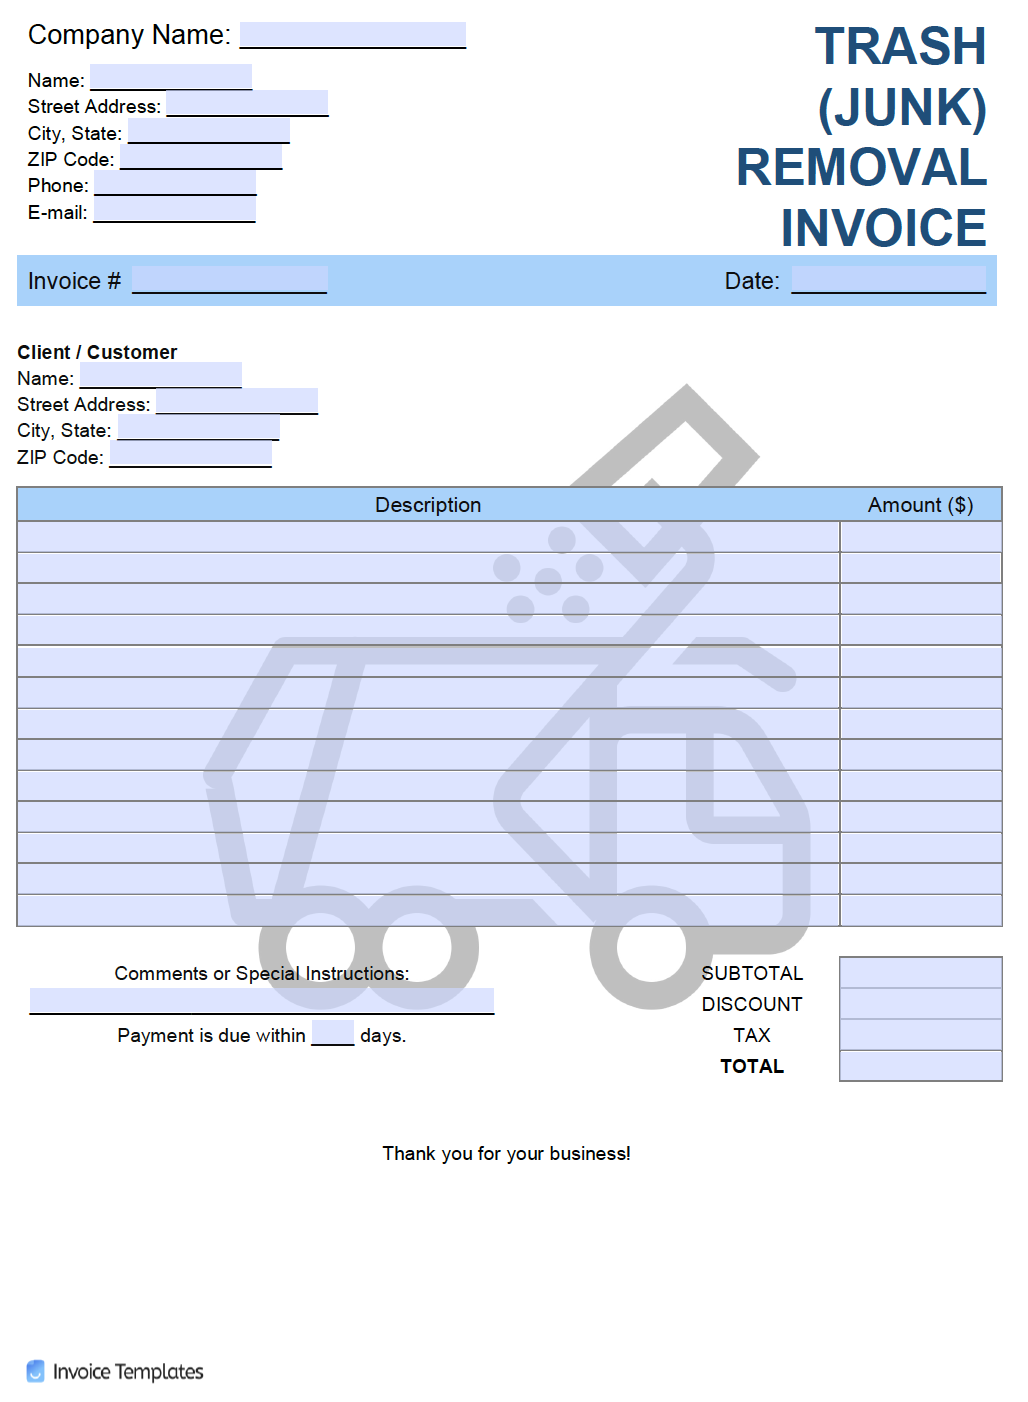 Free Trash (Junk) Removal Invoice Template PDF WORD EXCEL